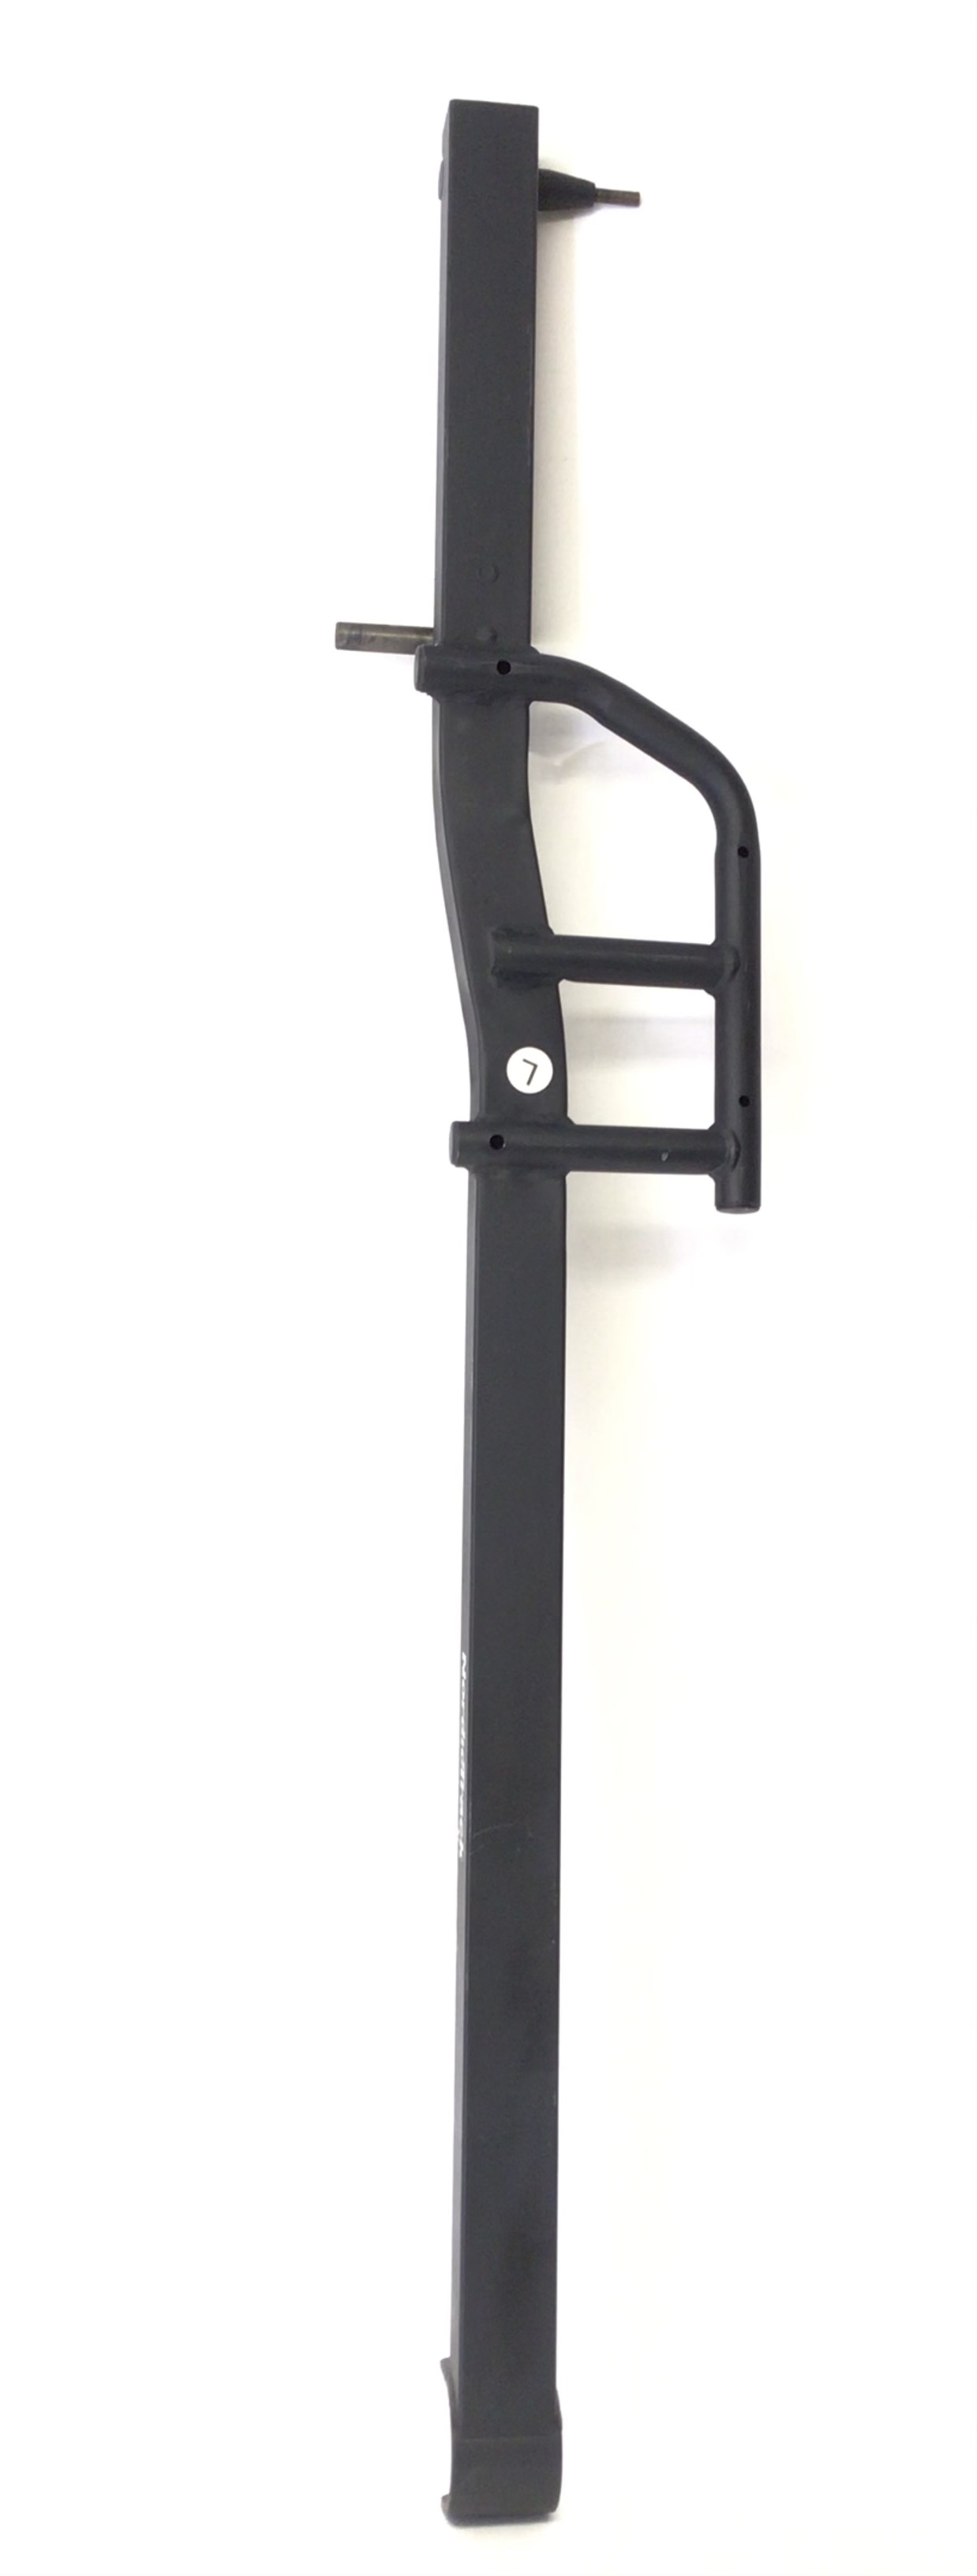 Left Pedal Arm (used)